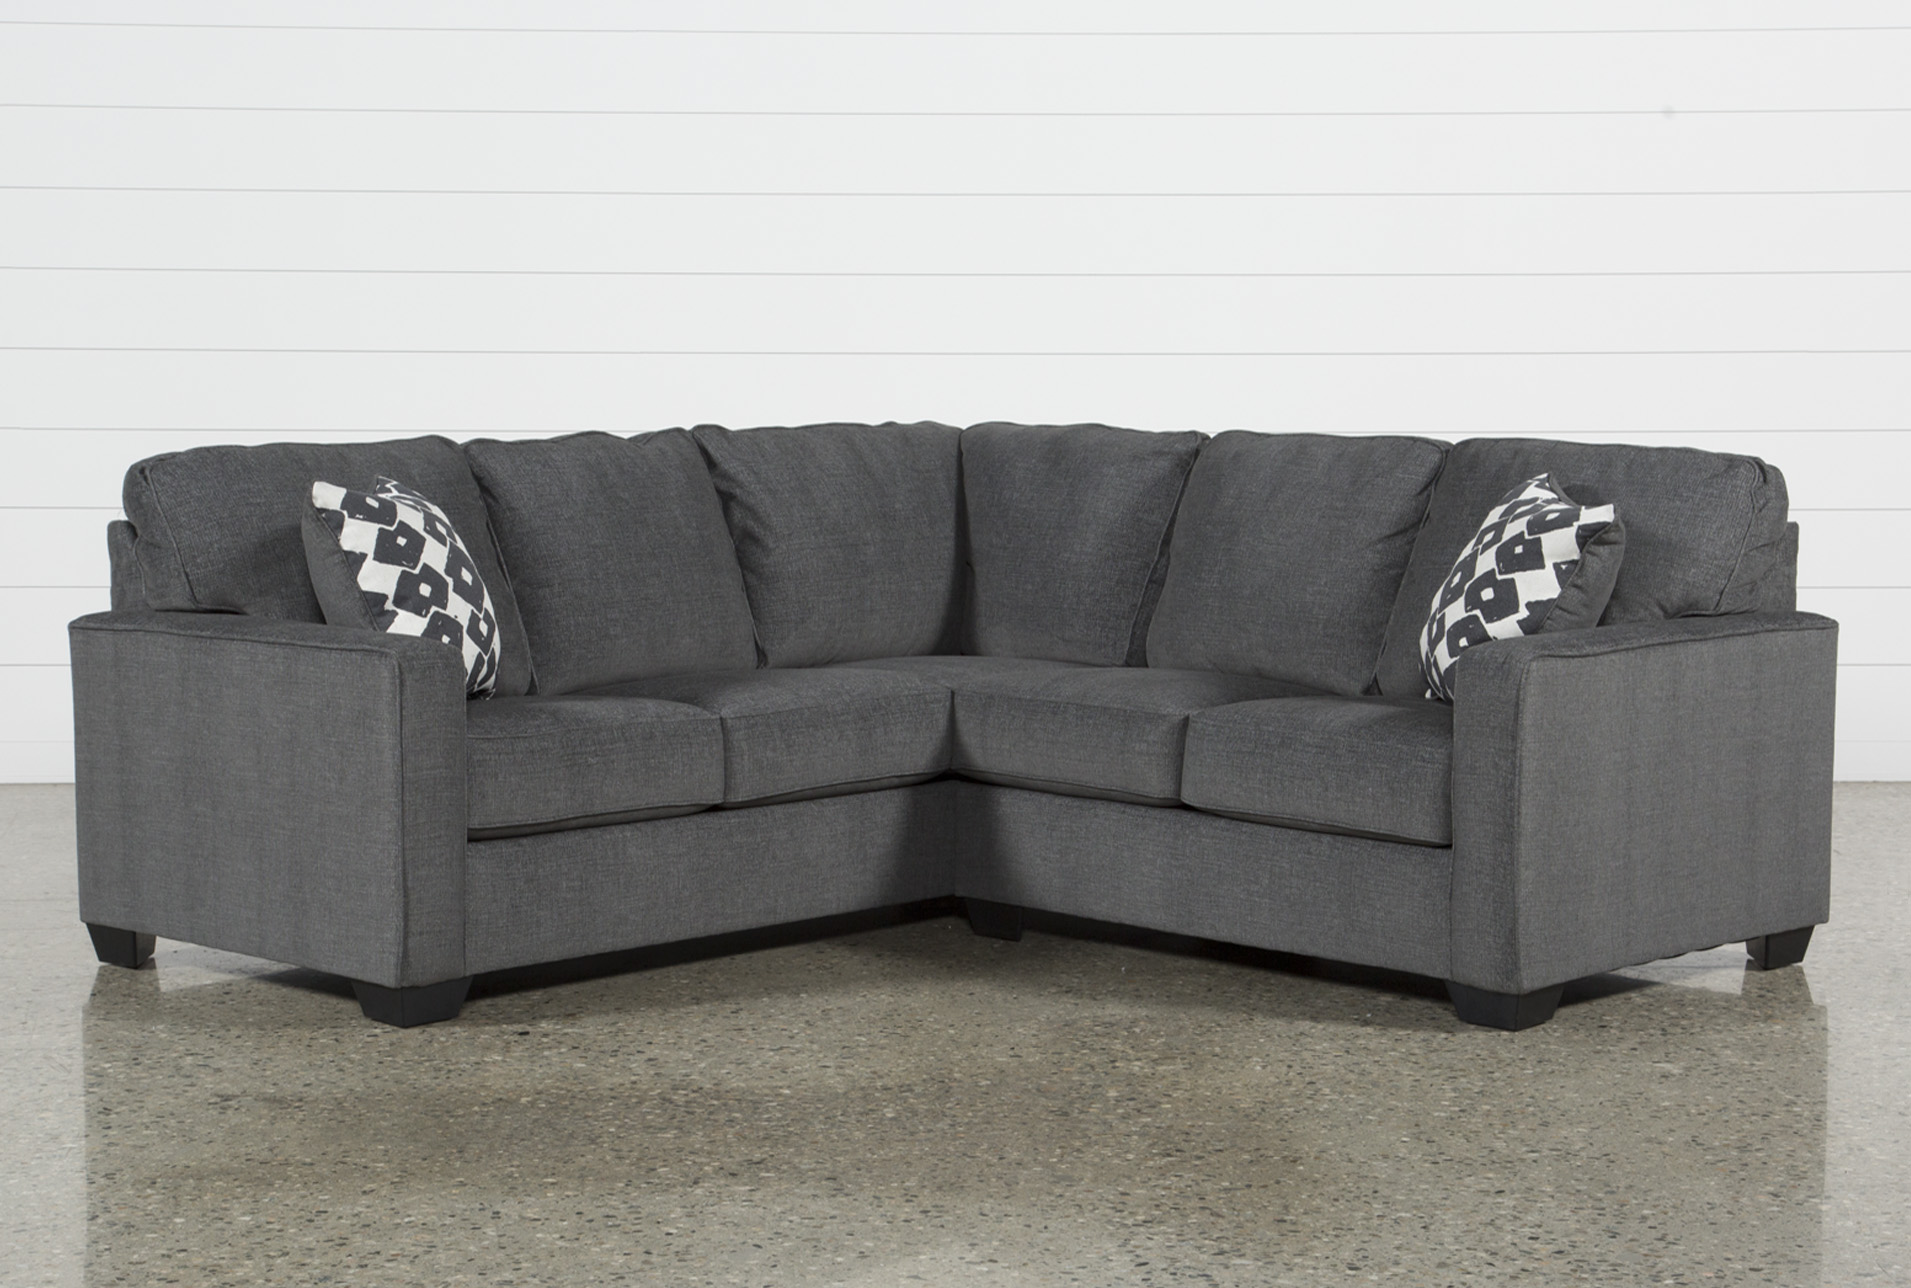 Turdur 2 Piece Sectional W/Raf Loveseat (Qty: 1) has been successfully  added to your Cart.